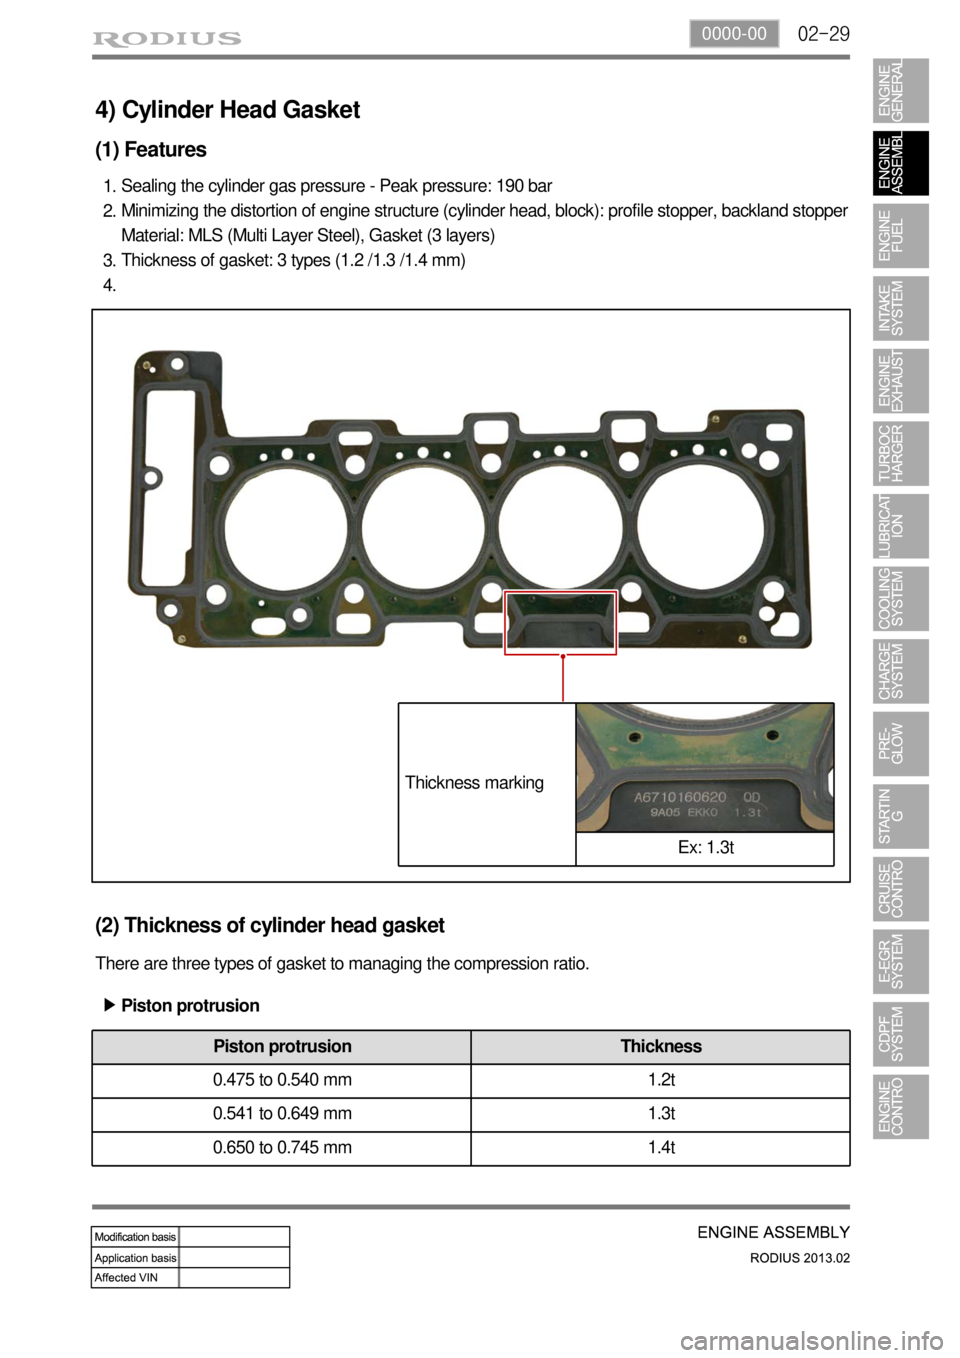 SSANGYONG TURISMO 2013  Service Manual 02-290000-00
4) Cylinder Head Gasket
(1) Features
Sealing the cylinder gas pressure - Peak pressure: 190 bar
Minimizing the distortion of engine structure (cylinder head, block): profile stopper, back